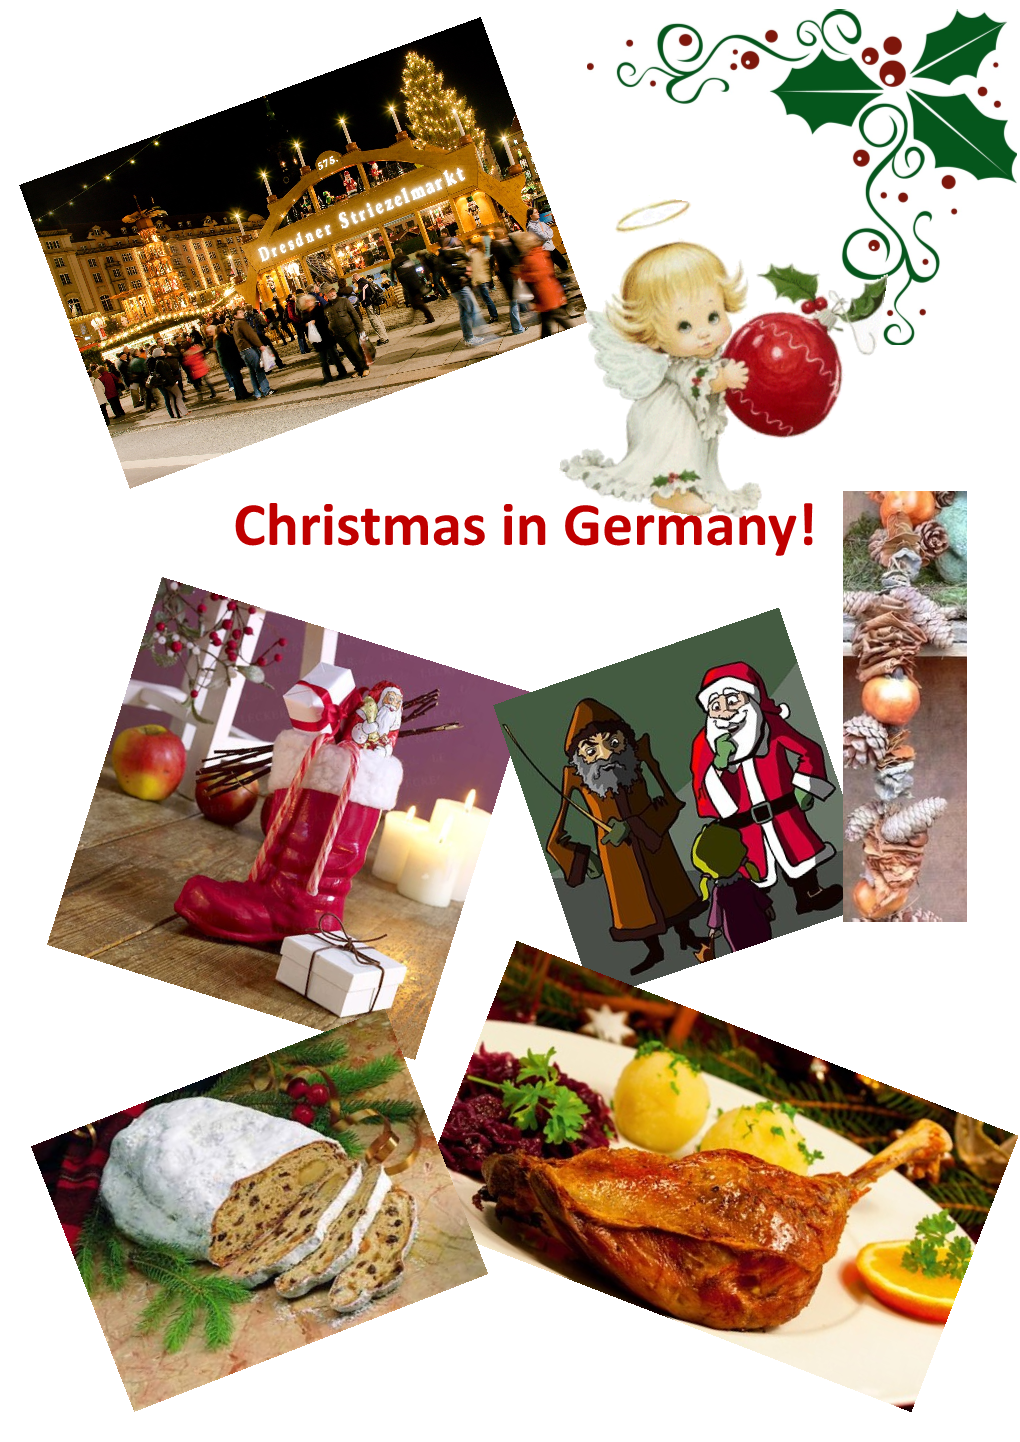 Christmas in Germany! ADVENT! the German Christmas Season Officially Begins with the First Sunday of Advent